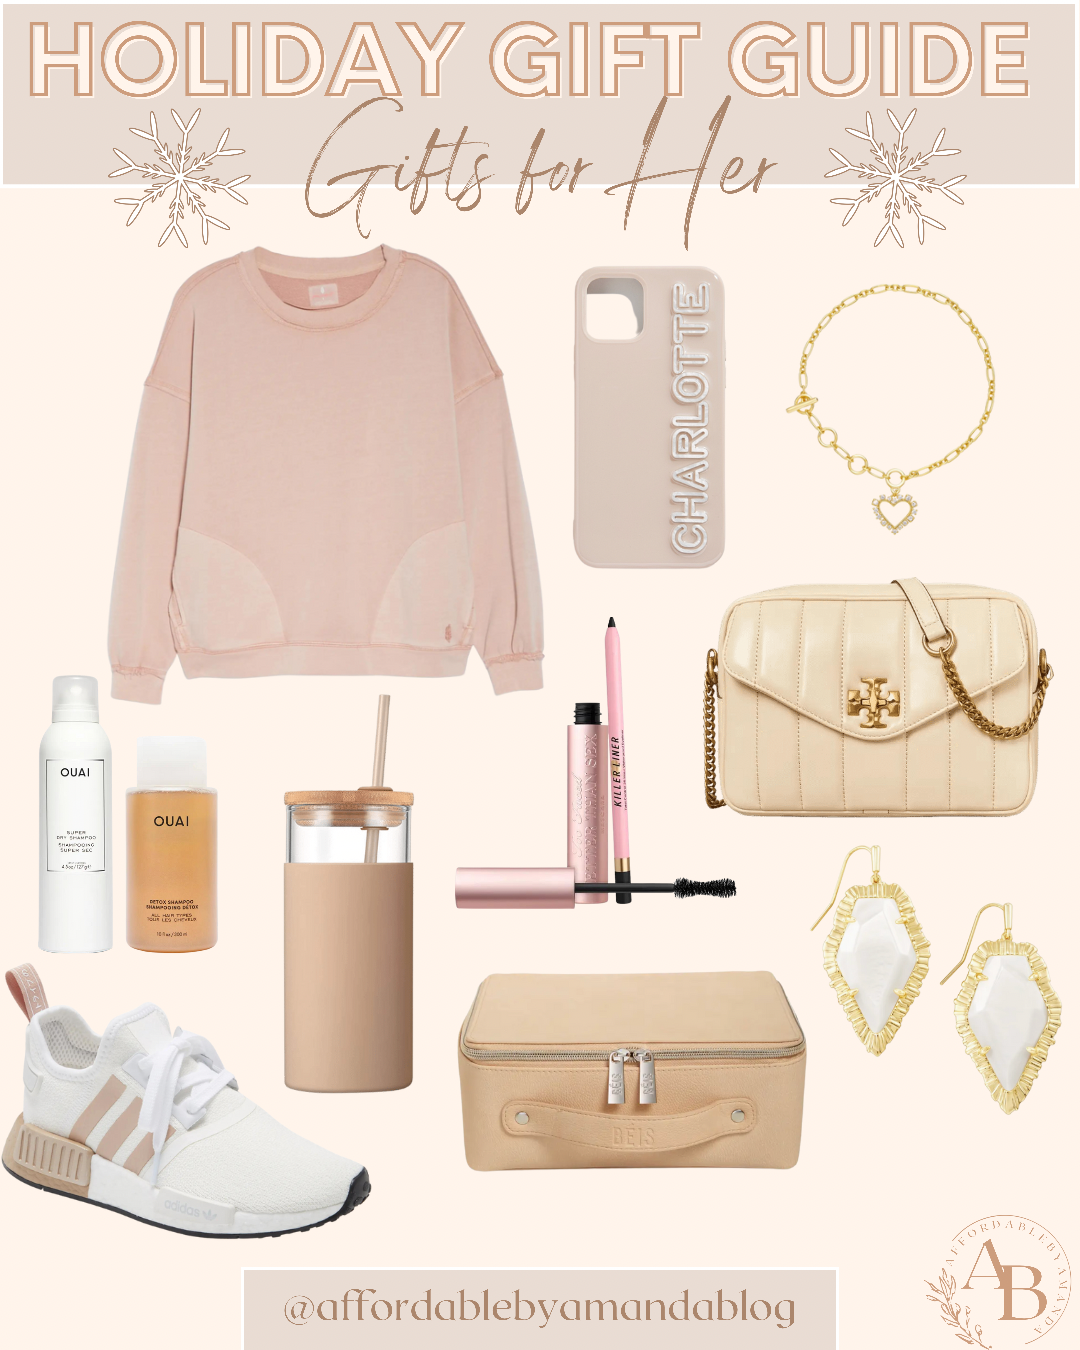 Gifts for Her - Holiday Gift Guide - Gifts for Women